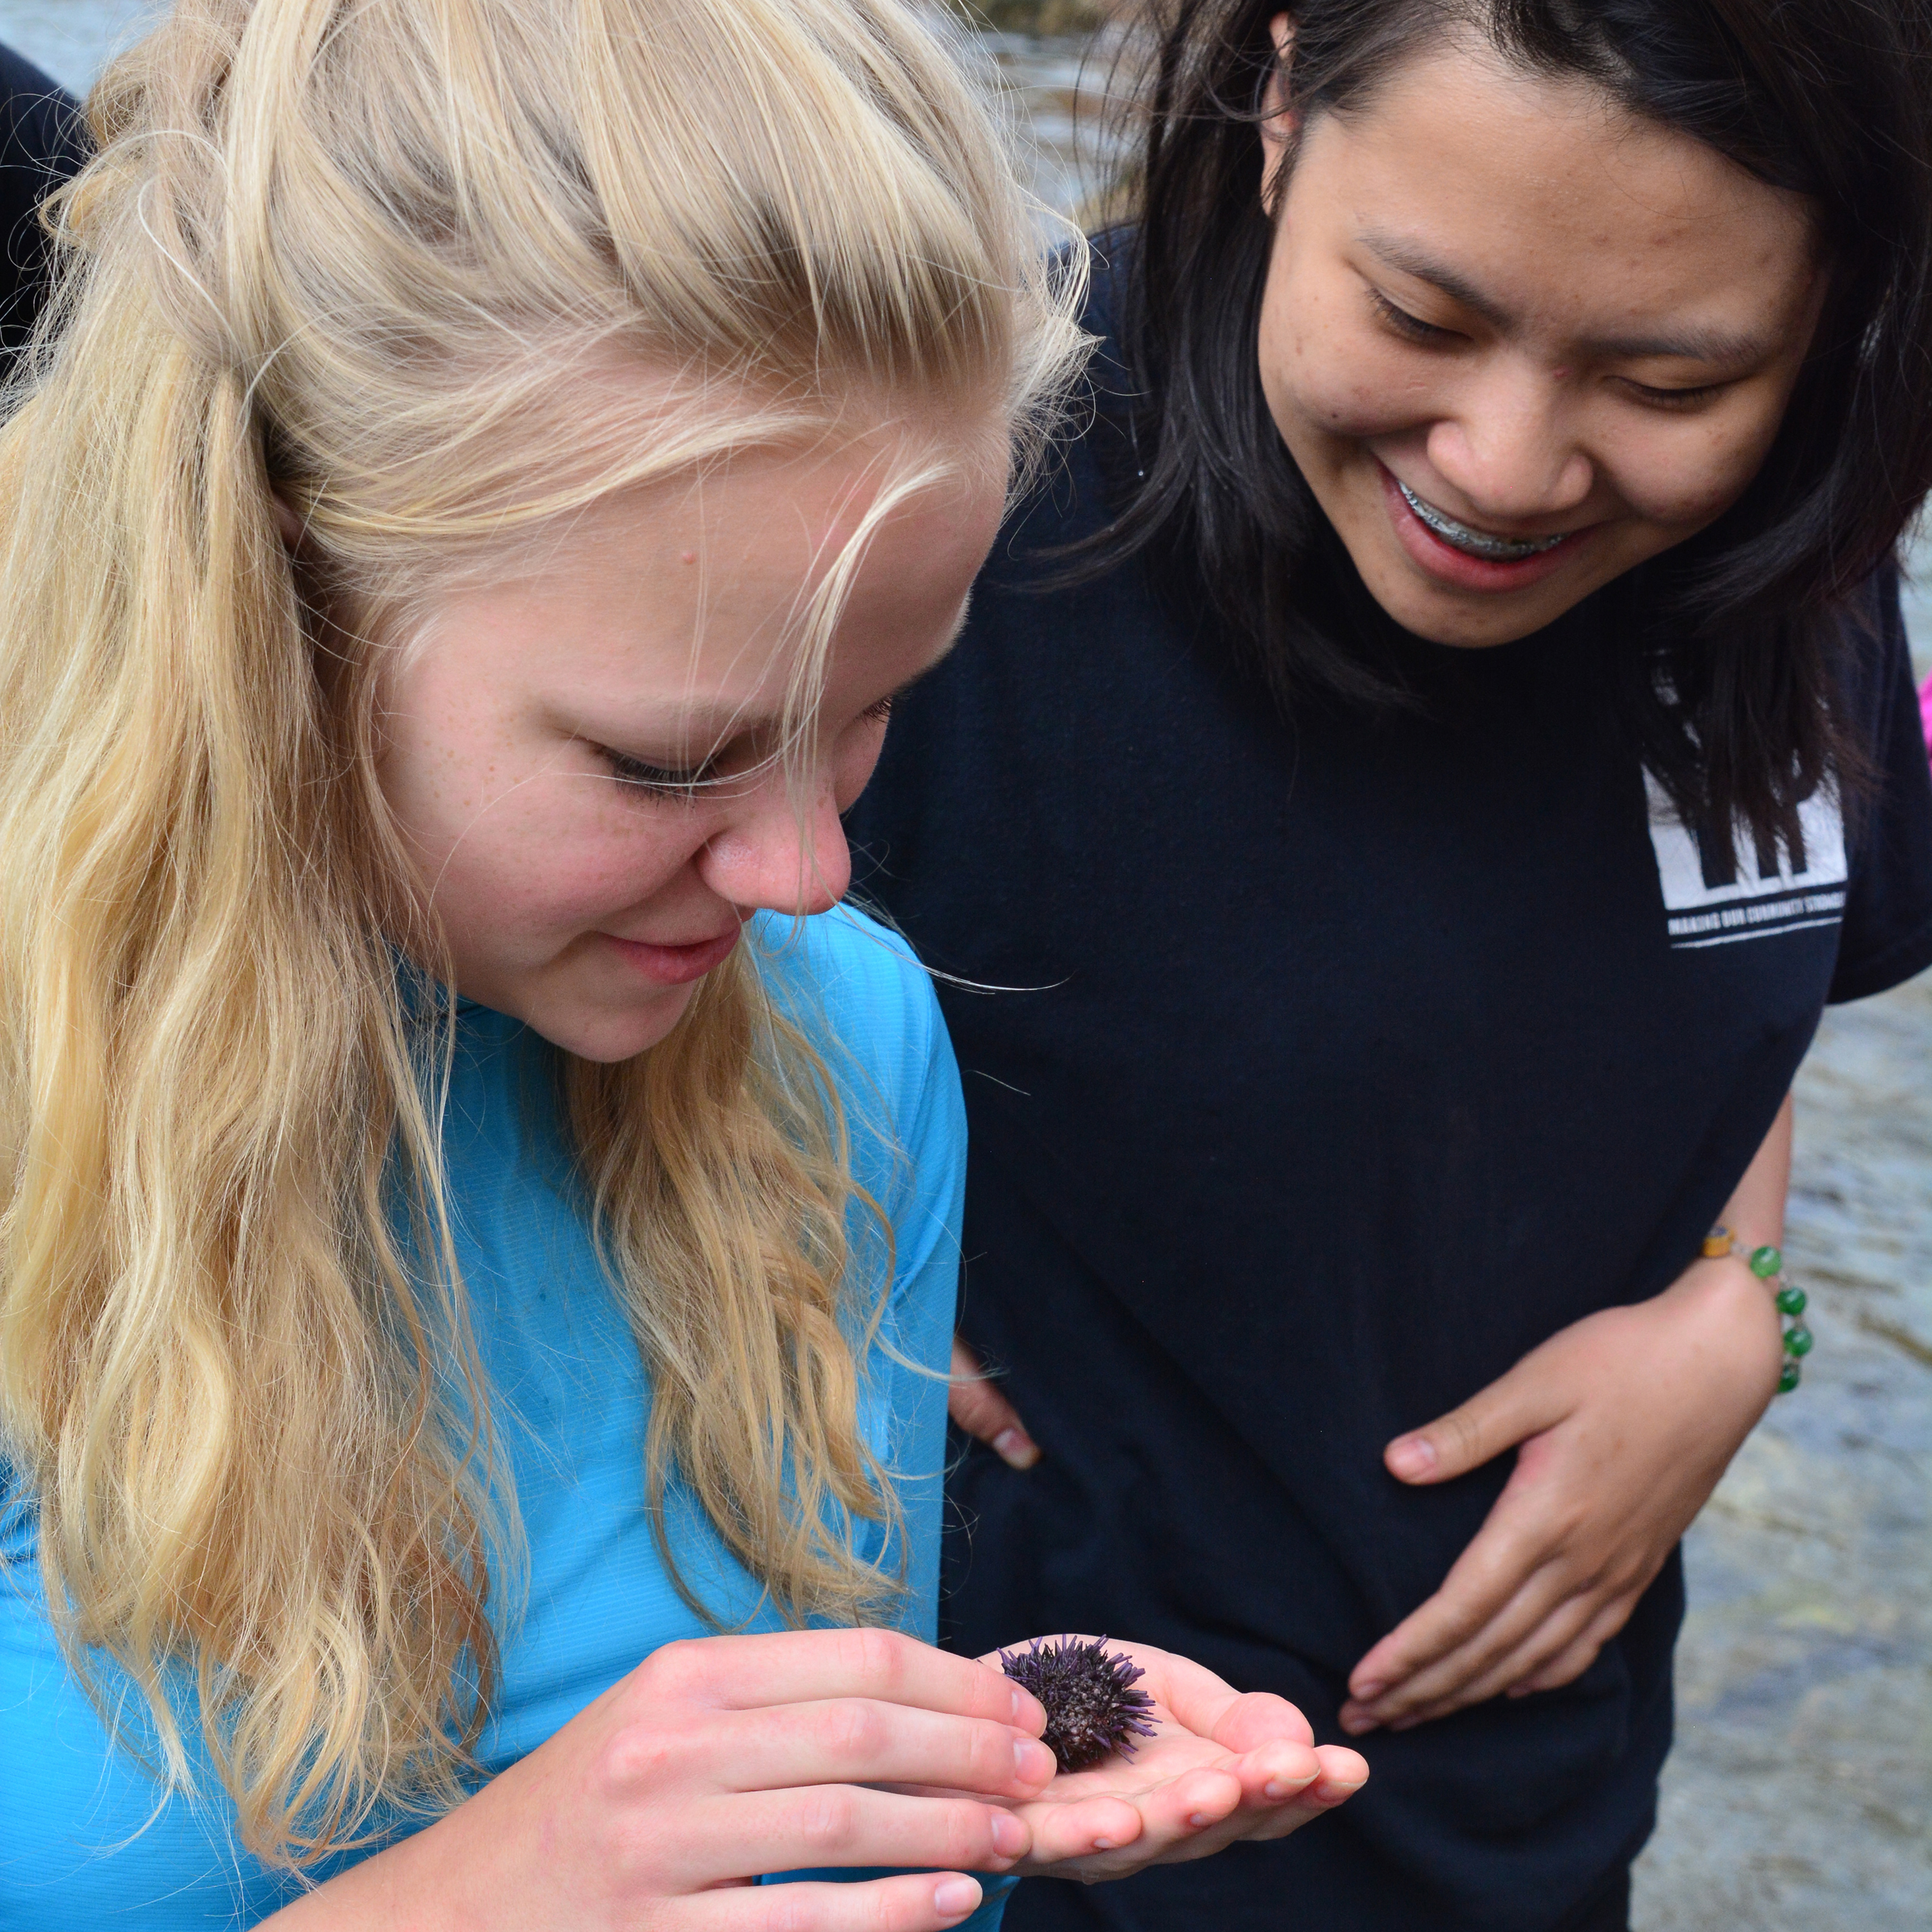 After their week in the field, Girls in Science fellows report an increased interest in scientific careers, greater confidence in their ability to build things and perform advanced science, and a heightened curiosity about how machines and electronics work.